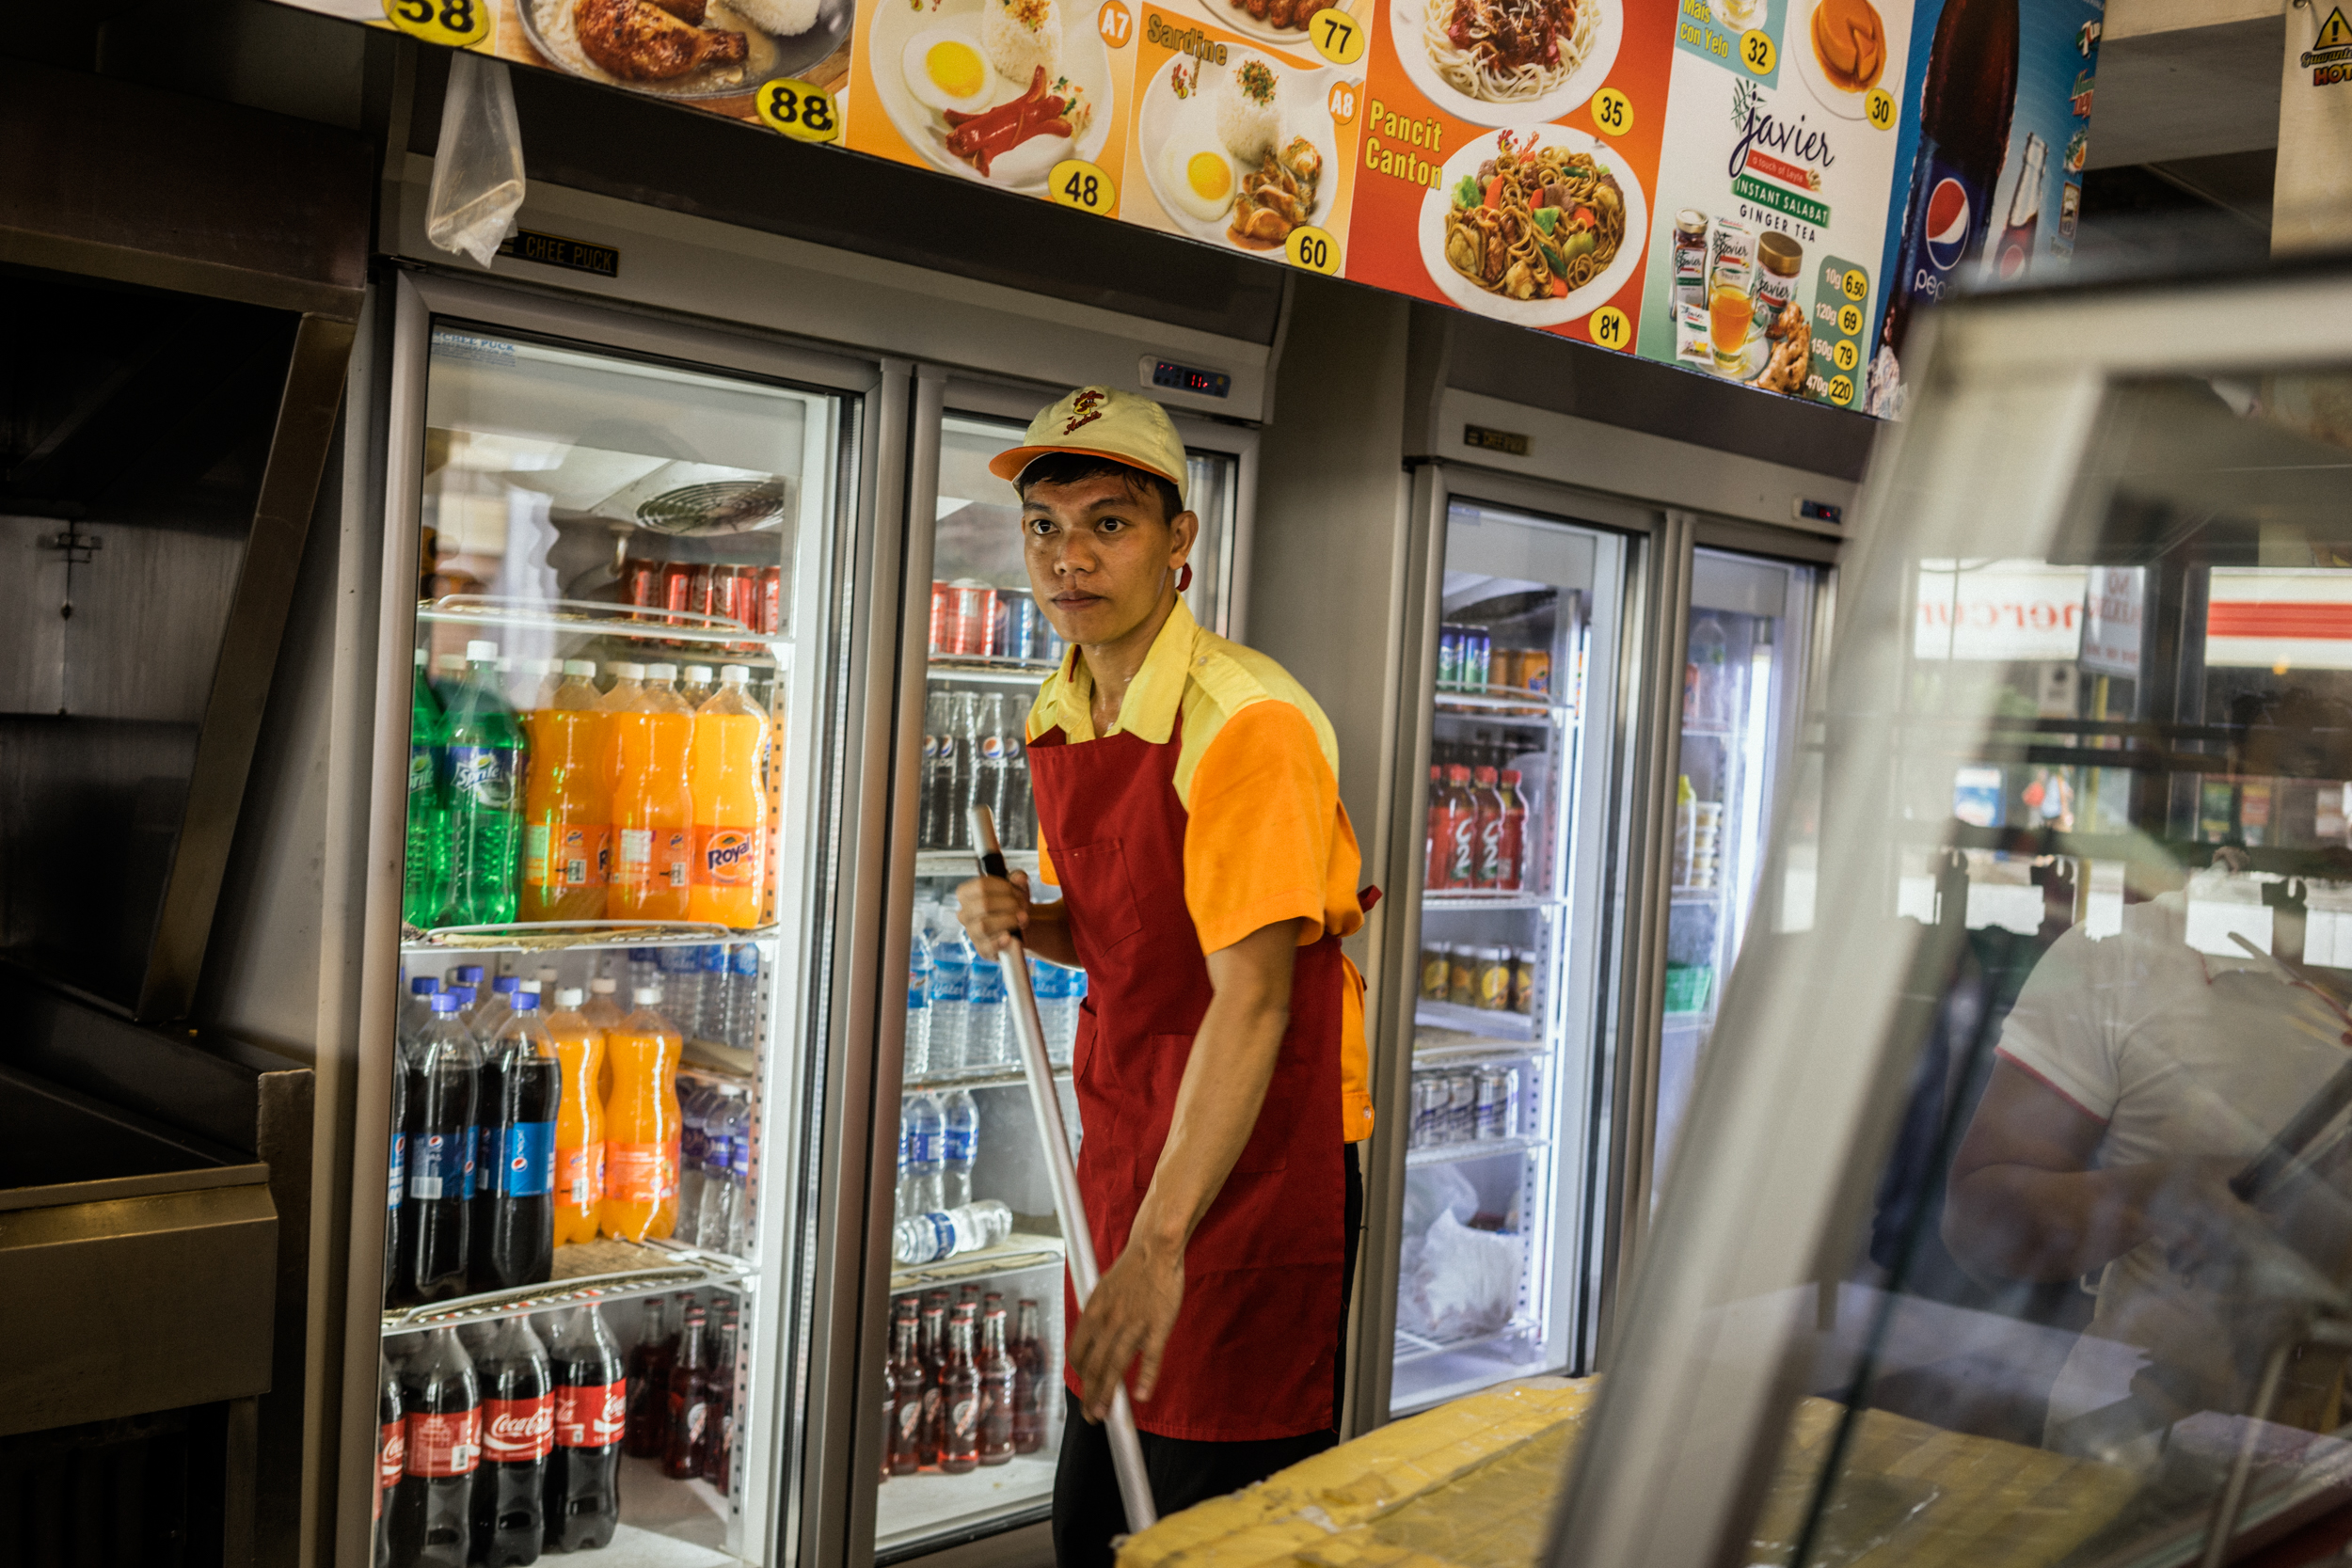  Kalibo, Philippines - September 20, 2015: Emmanuel Concepcion mops in the local fast food chain where he is currently employed after being repatriated from a fishing vessel. Emmanuel is a victim of a Singapore-based maritime manning agency that coll